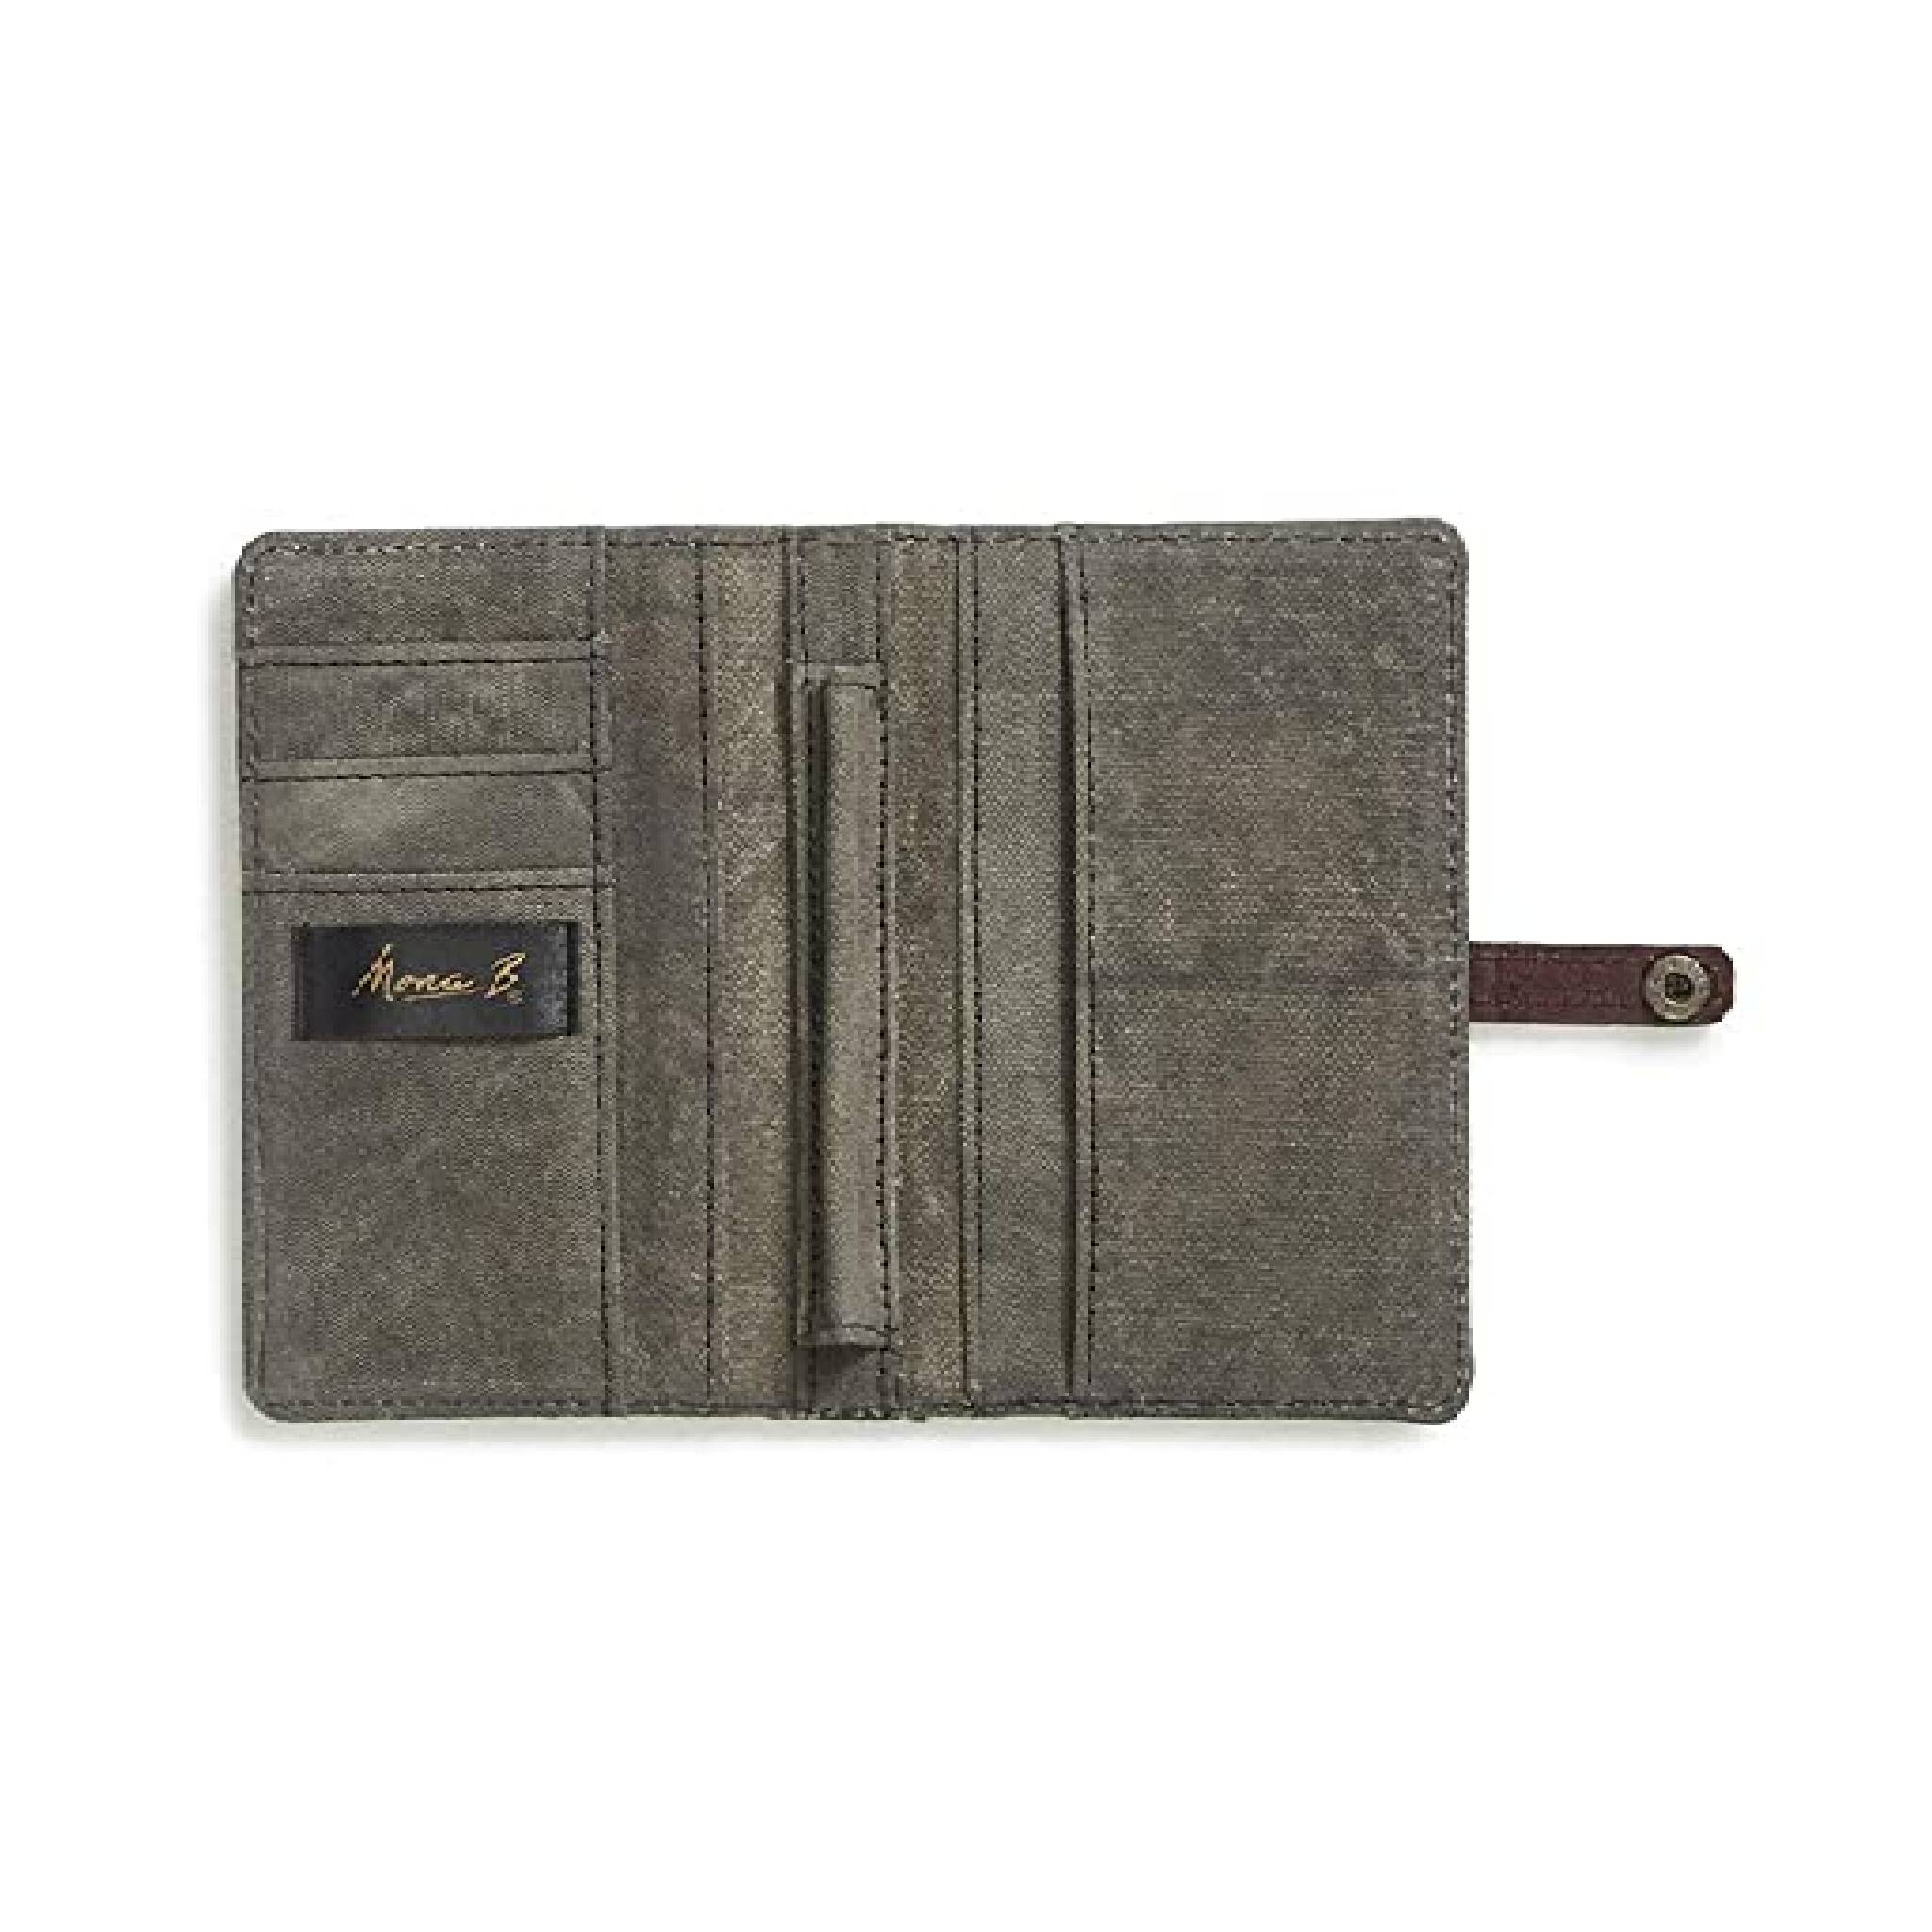 Mona B Trip Regrets Upcycled Canvas Passport Travel Women's Wallet (Brown)